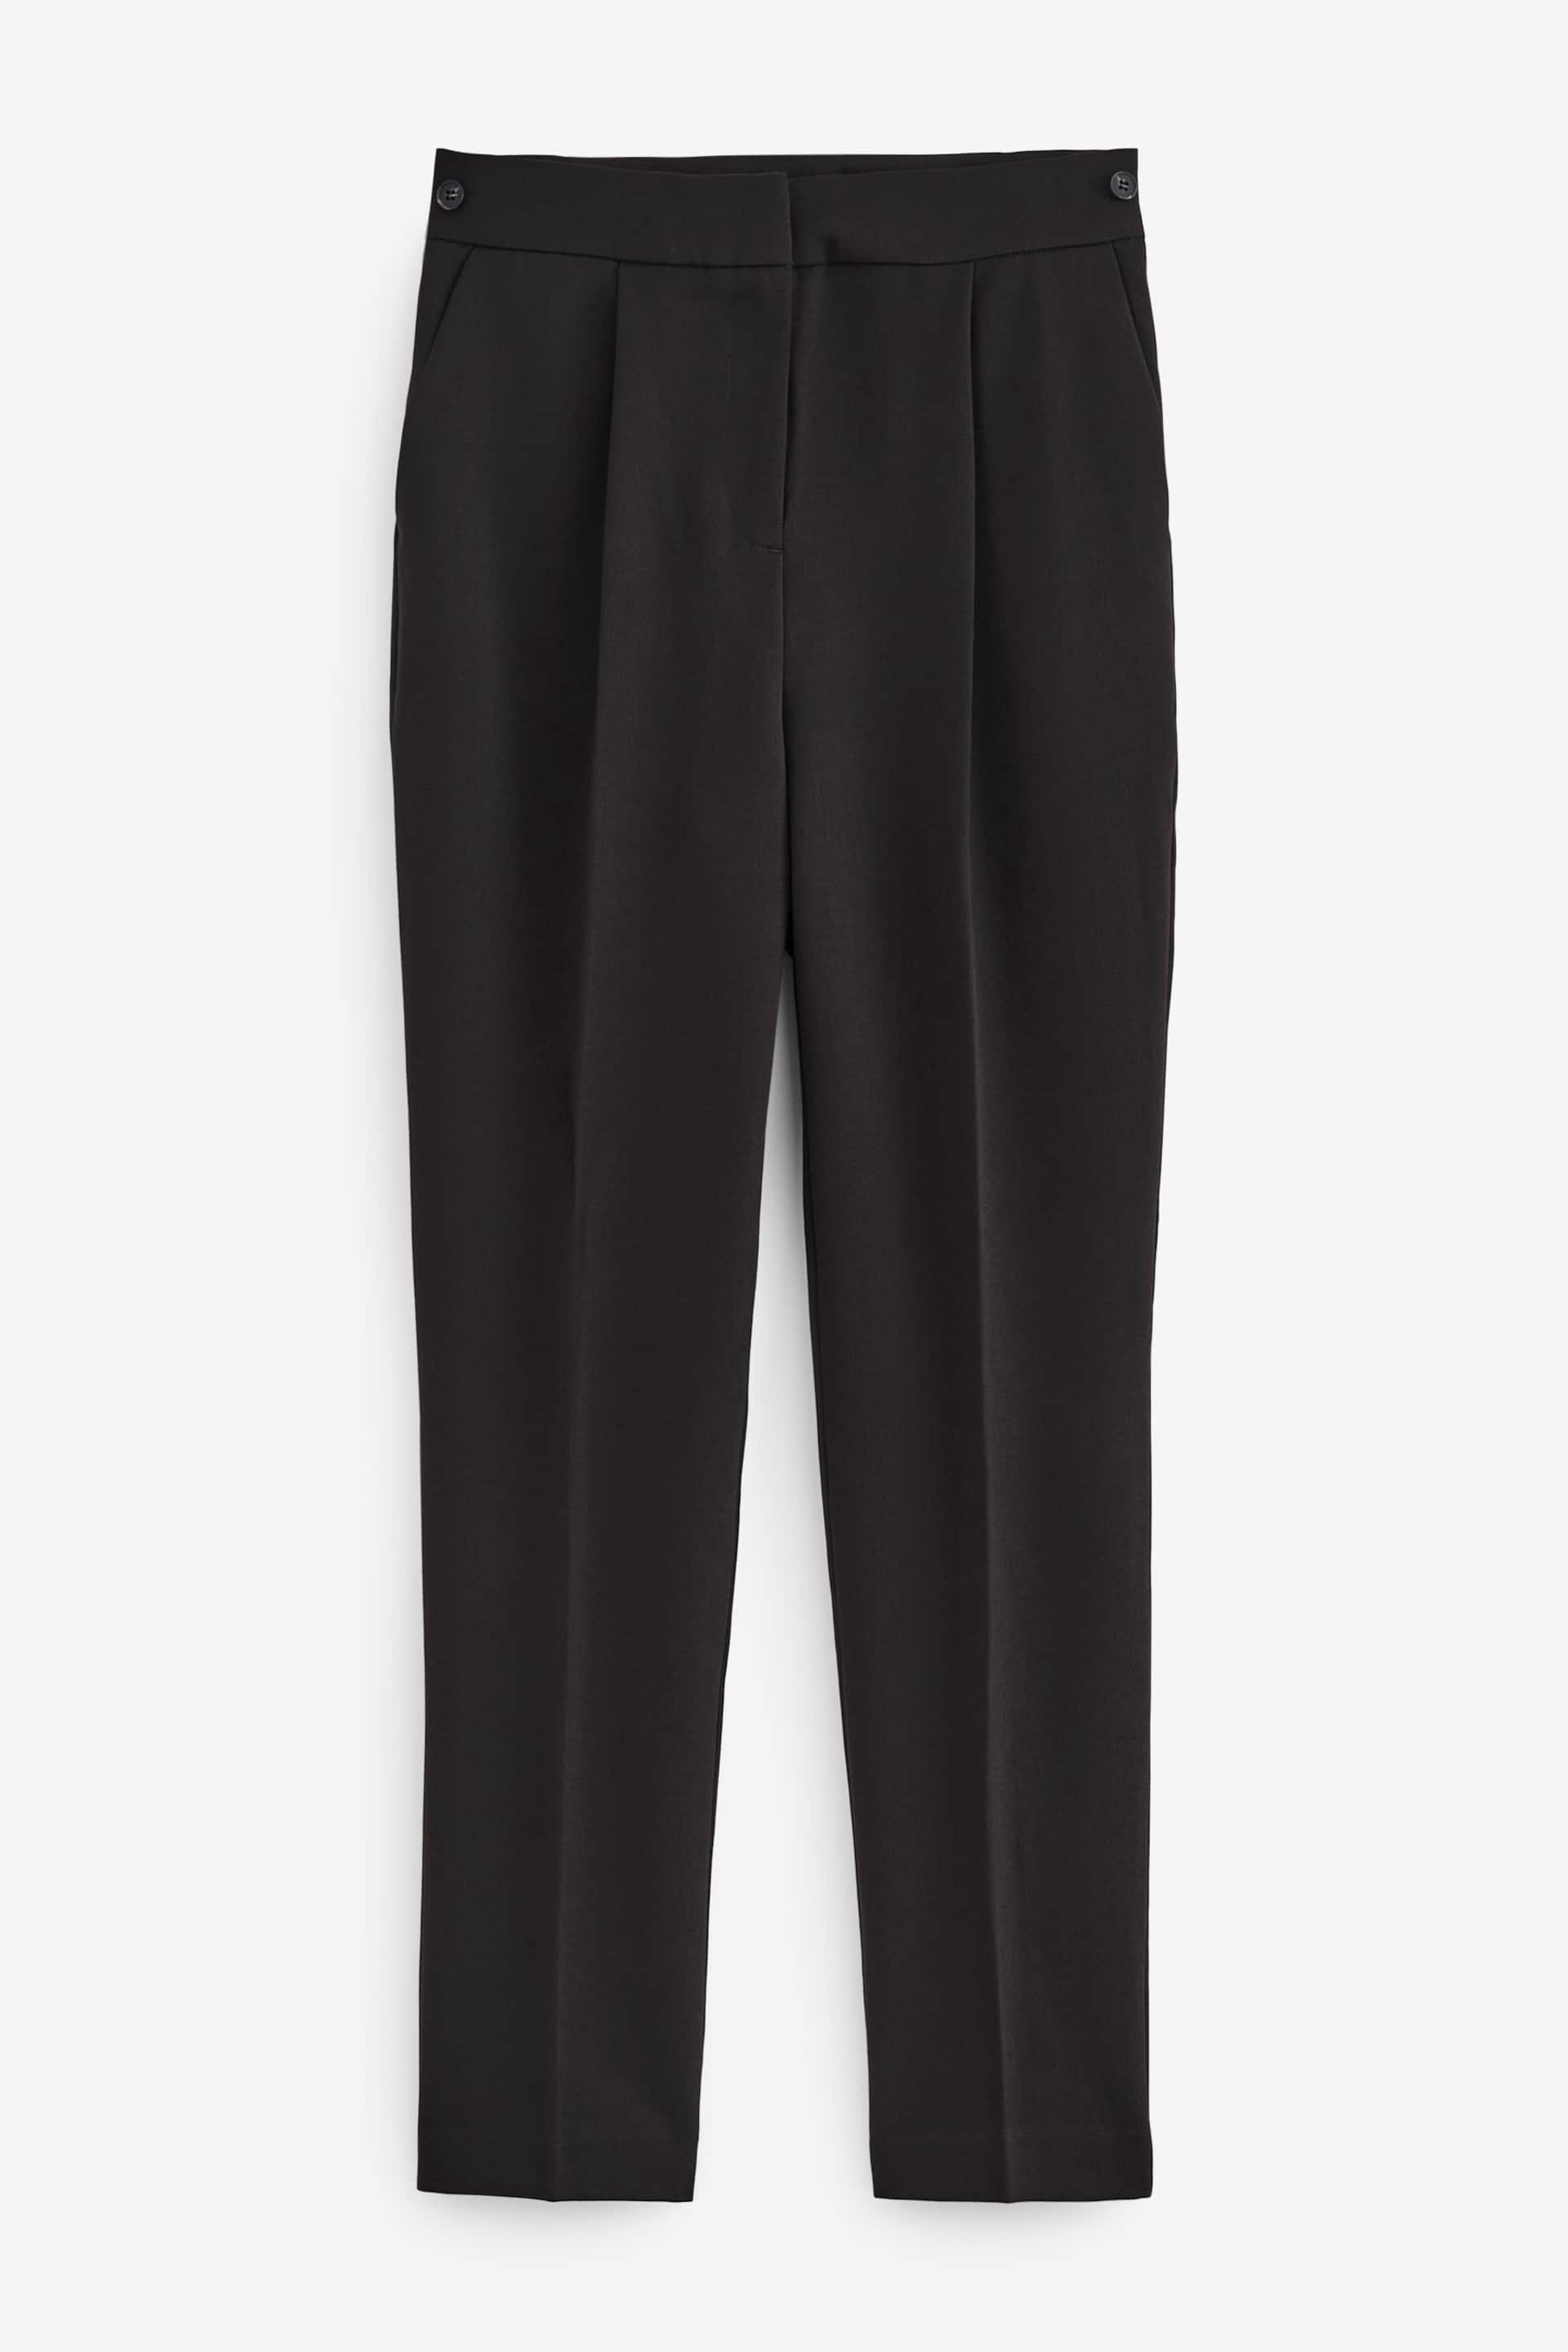 Black Tailored Hourglass Slim Trousers - Image 5 of 5